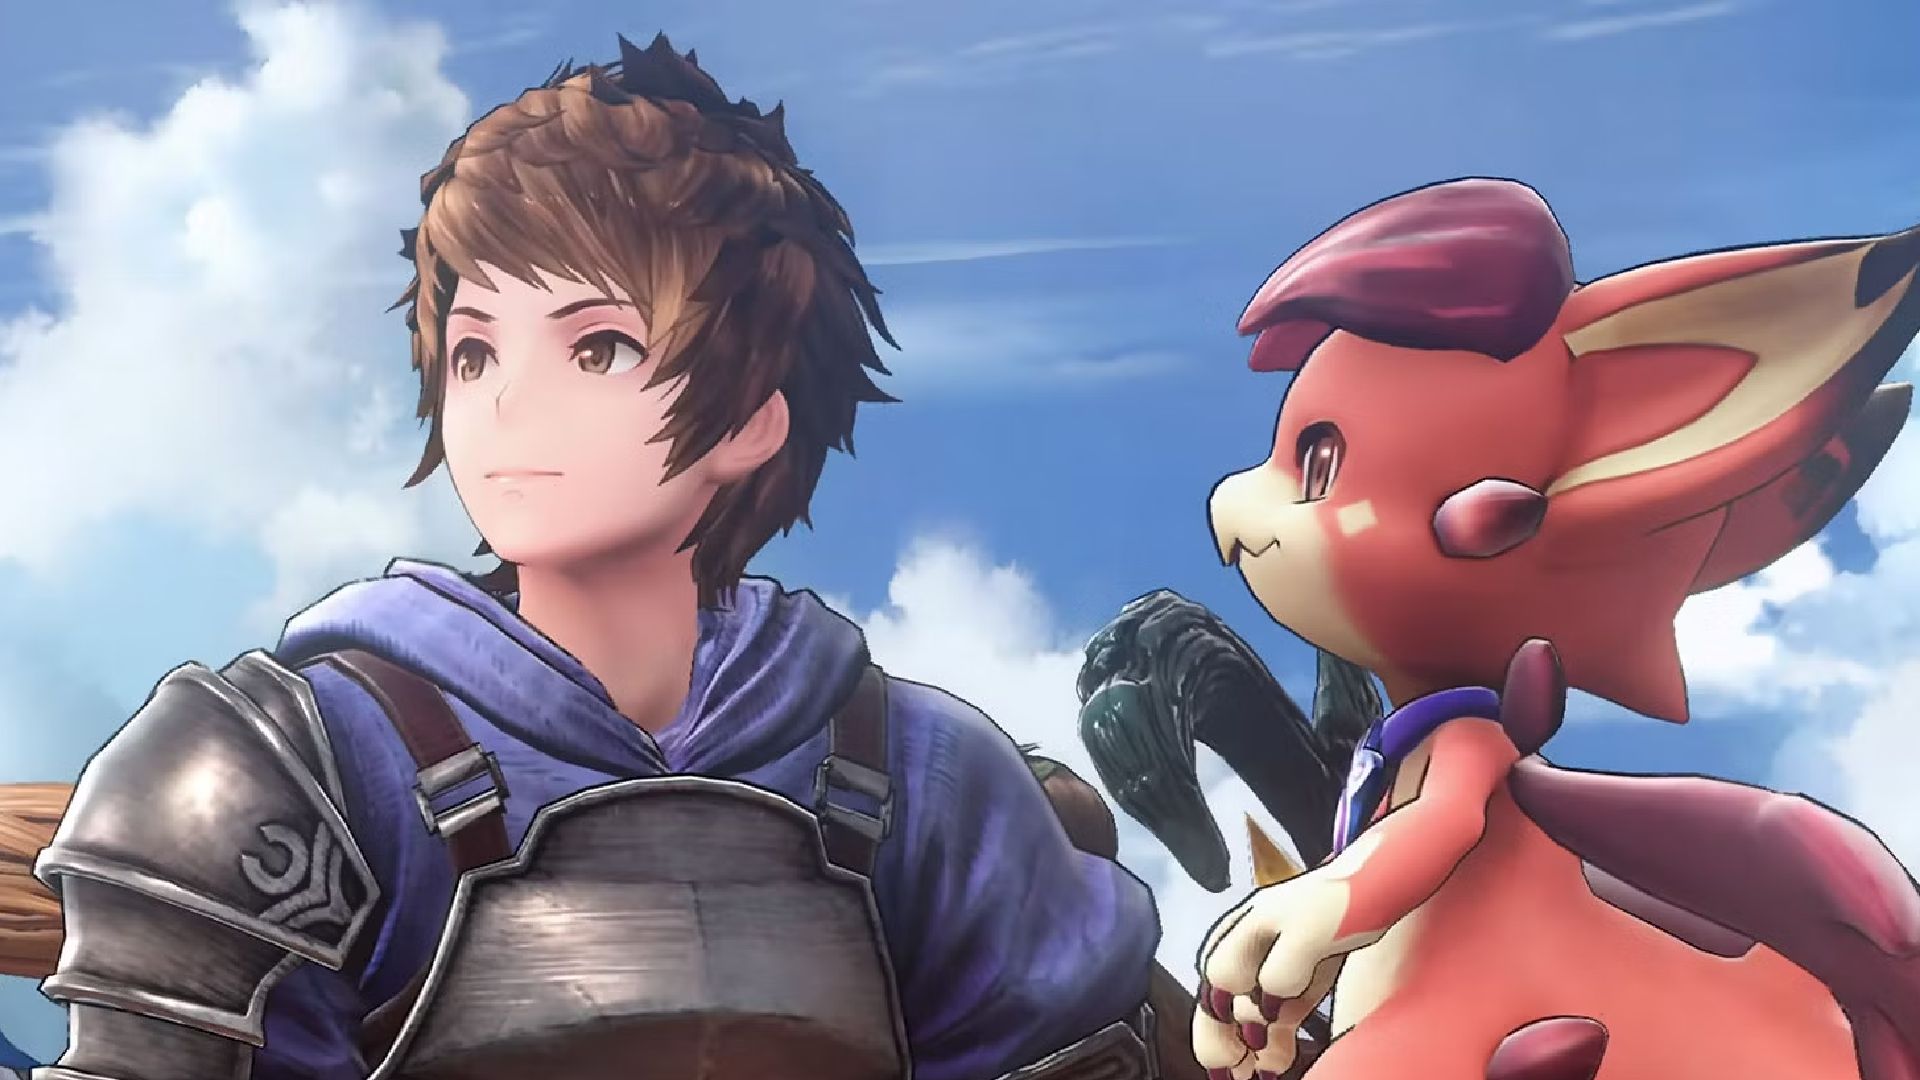 Gran and a little dragon looking into the sky in Granblue Fantasy: Relink